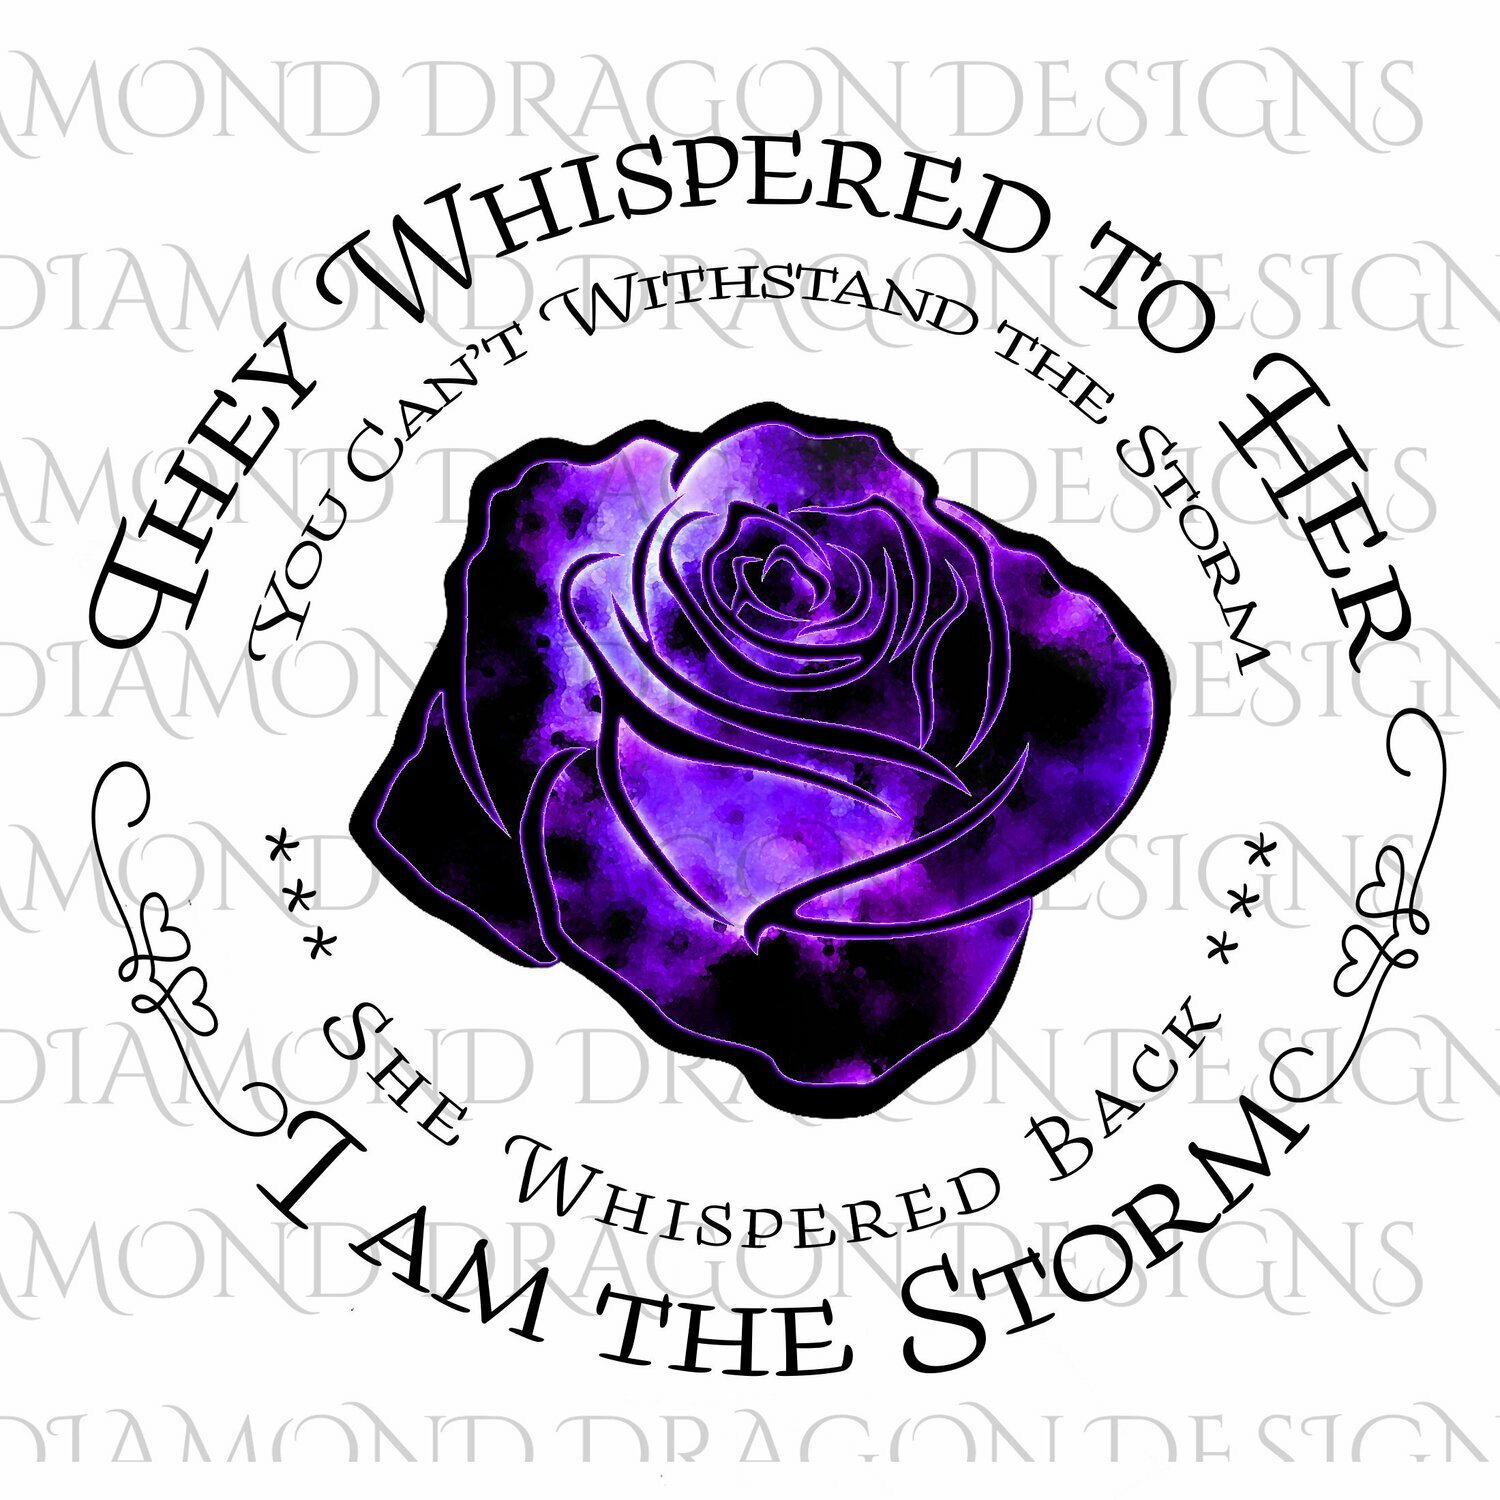 Flowers - They Whispered to Her, Cannot Withstand the Storm, I am the Storm, Quote, Purple Galaxy Rose, Waterslide